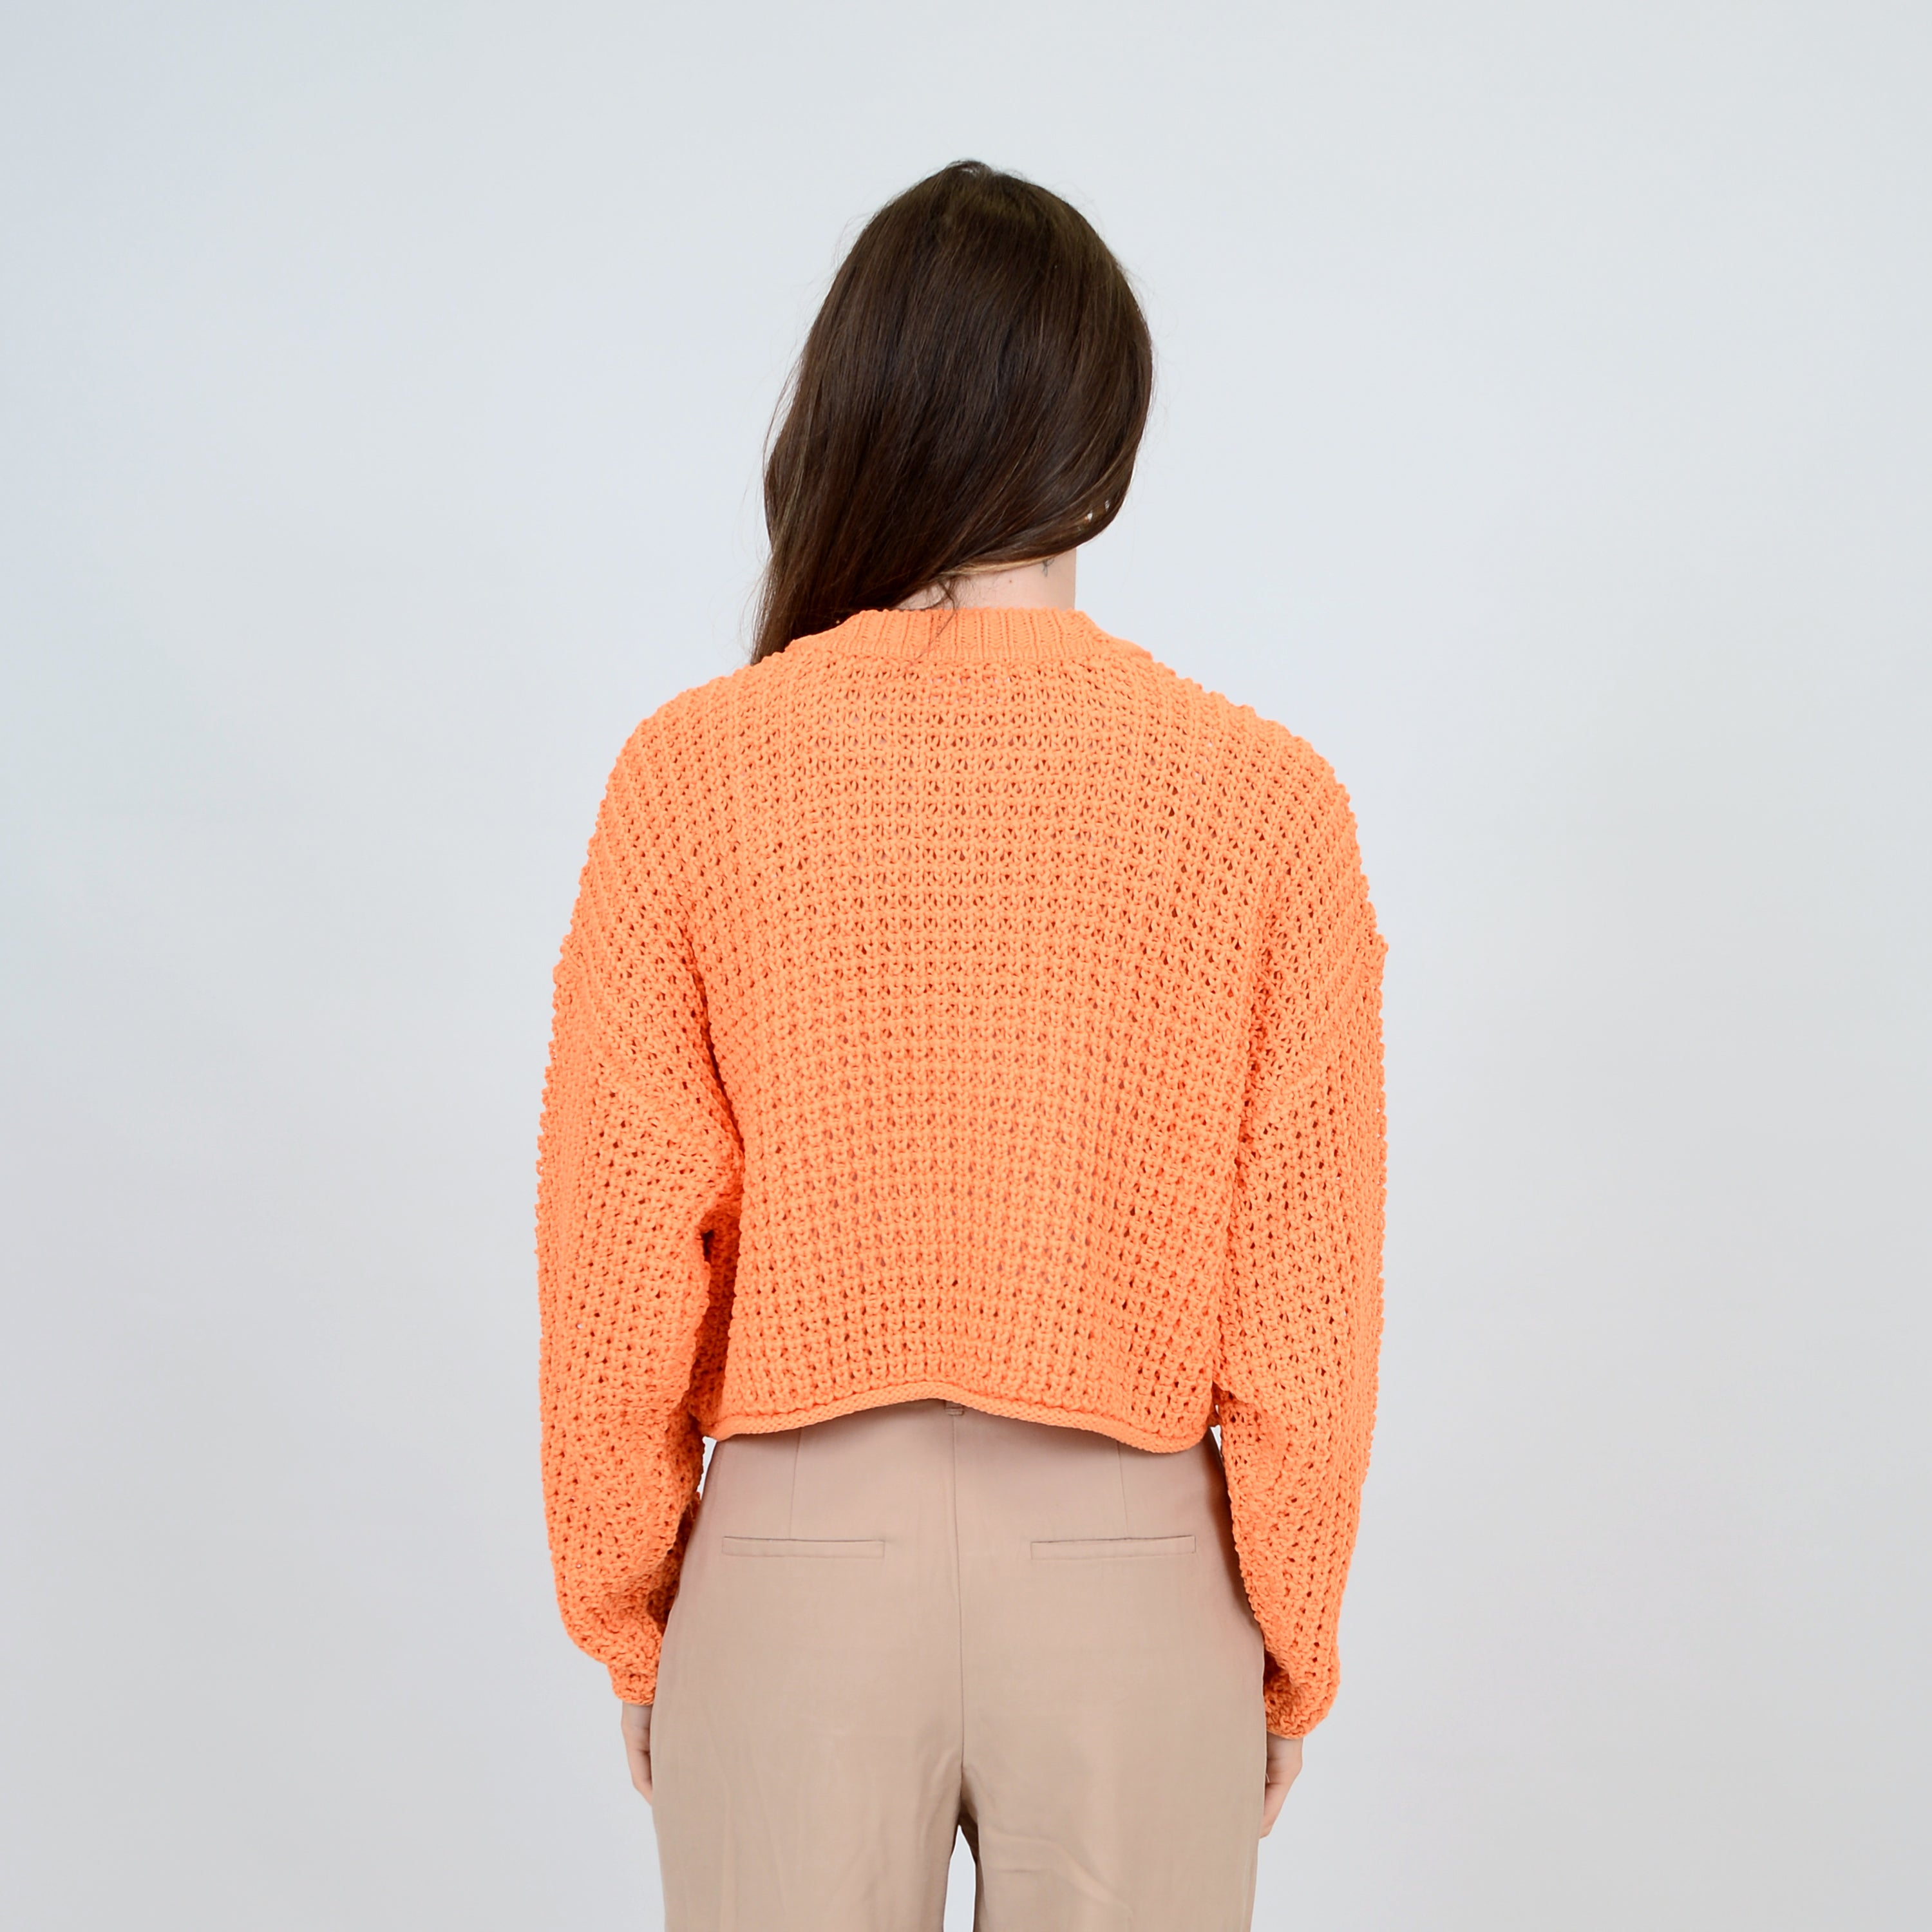 RD Style - Darla Cropped Sweater in Apricot